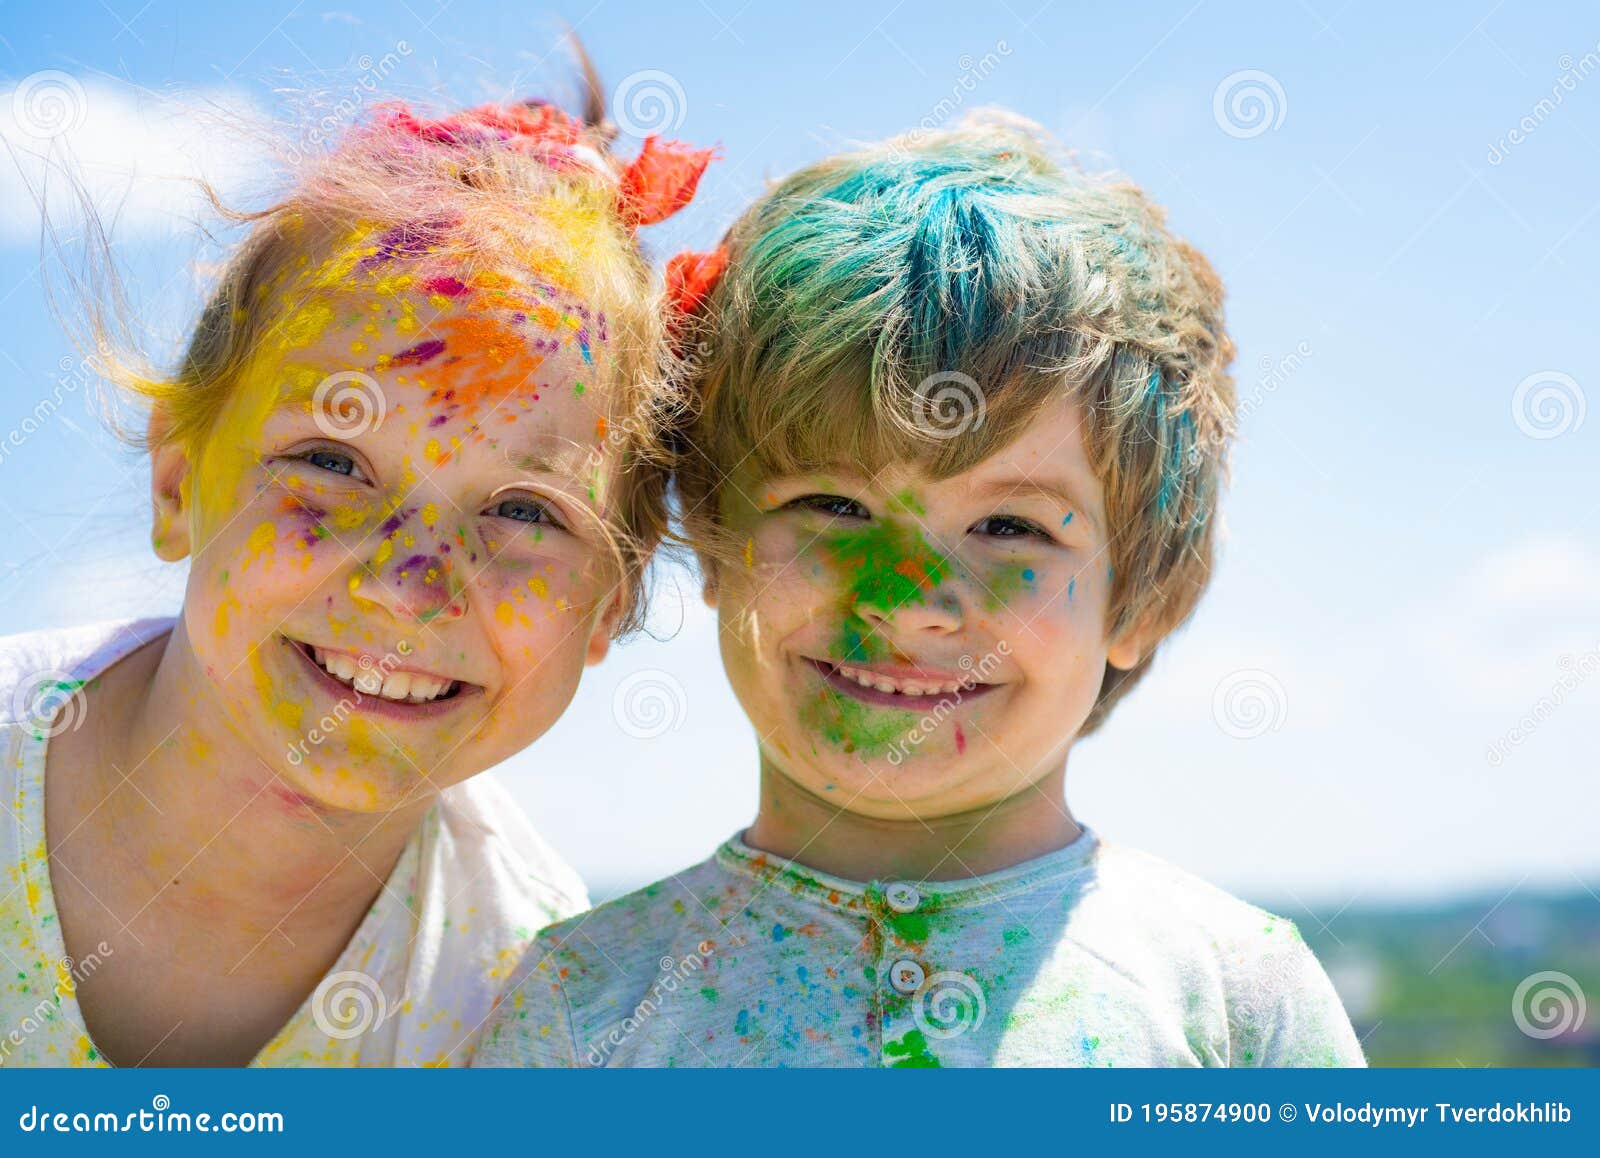 Smiling Little Kids Portrait. Painted Faces of Funny Kids. Children Holi  Festival of Colors Stock Photo - Image of colorful, funny: 195874900